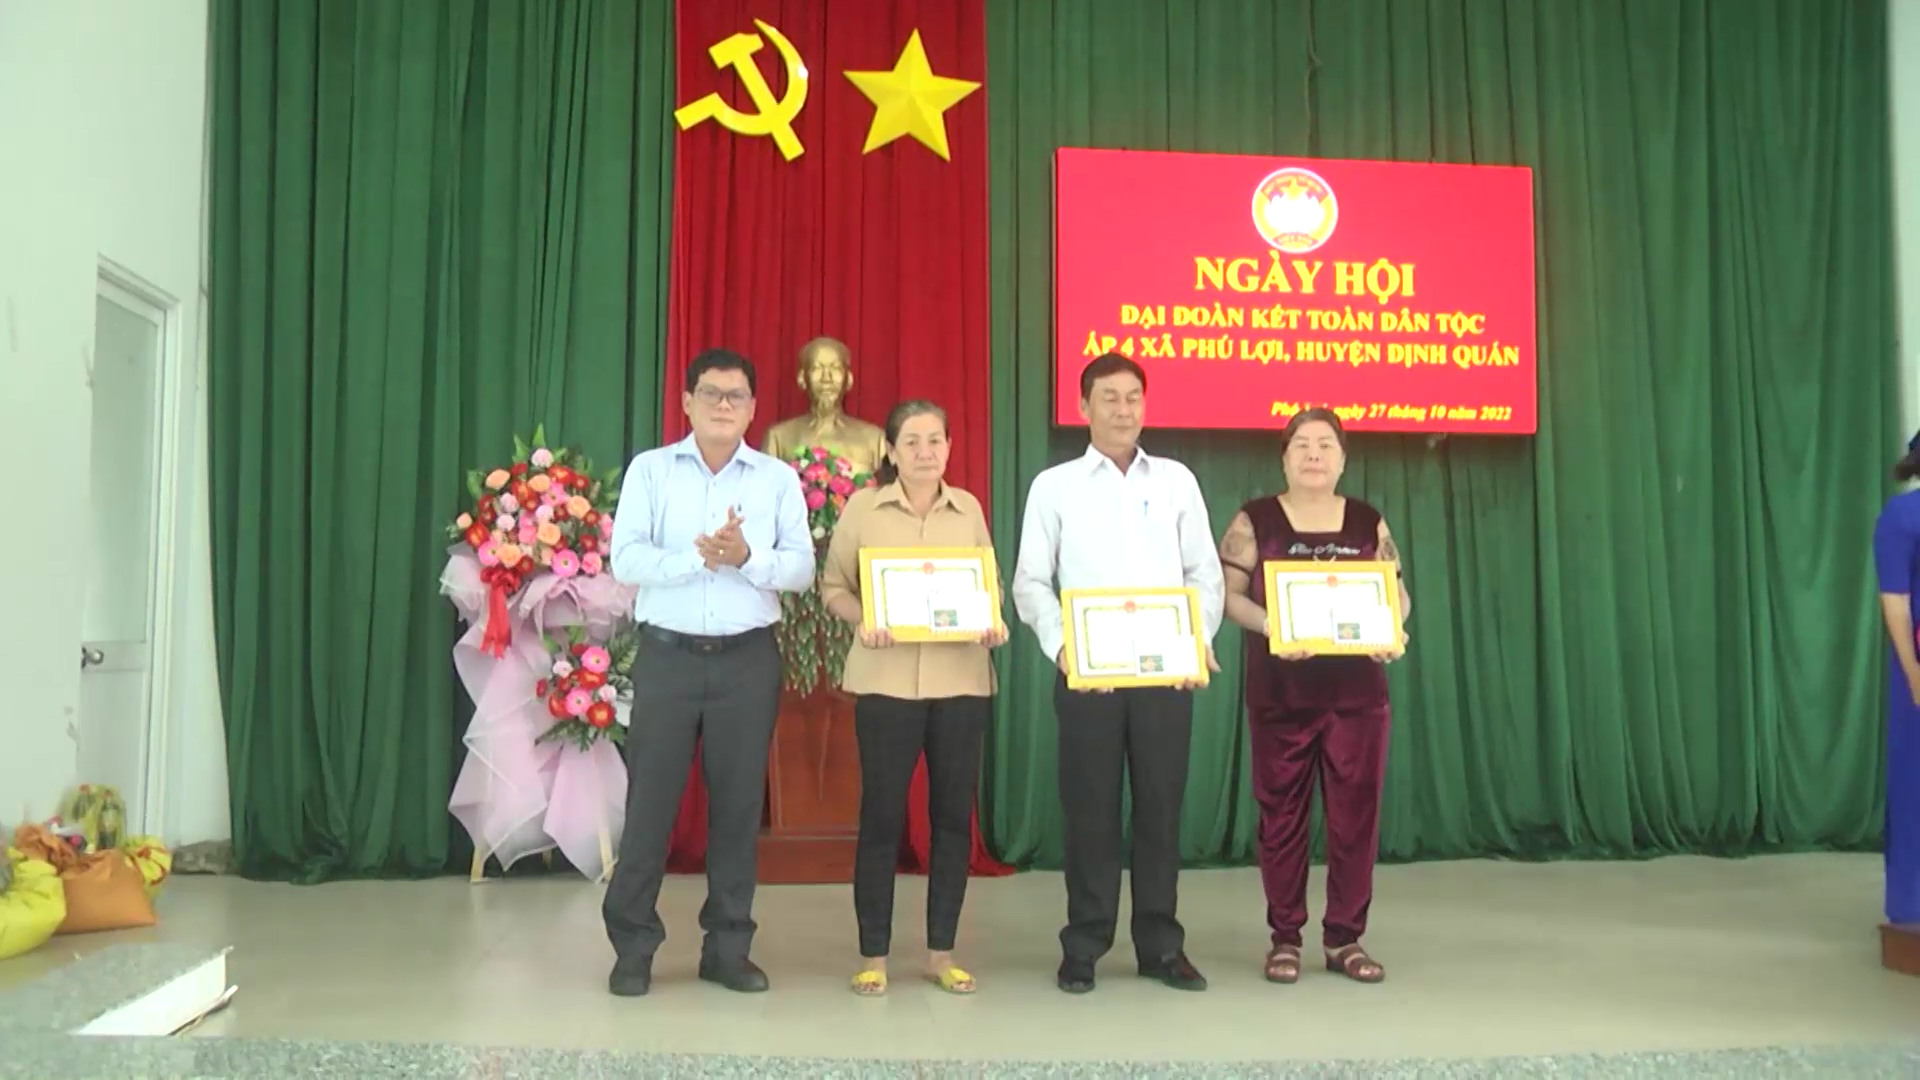 cac tap the ca nhan duoc khen thuong.png